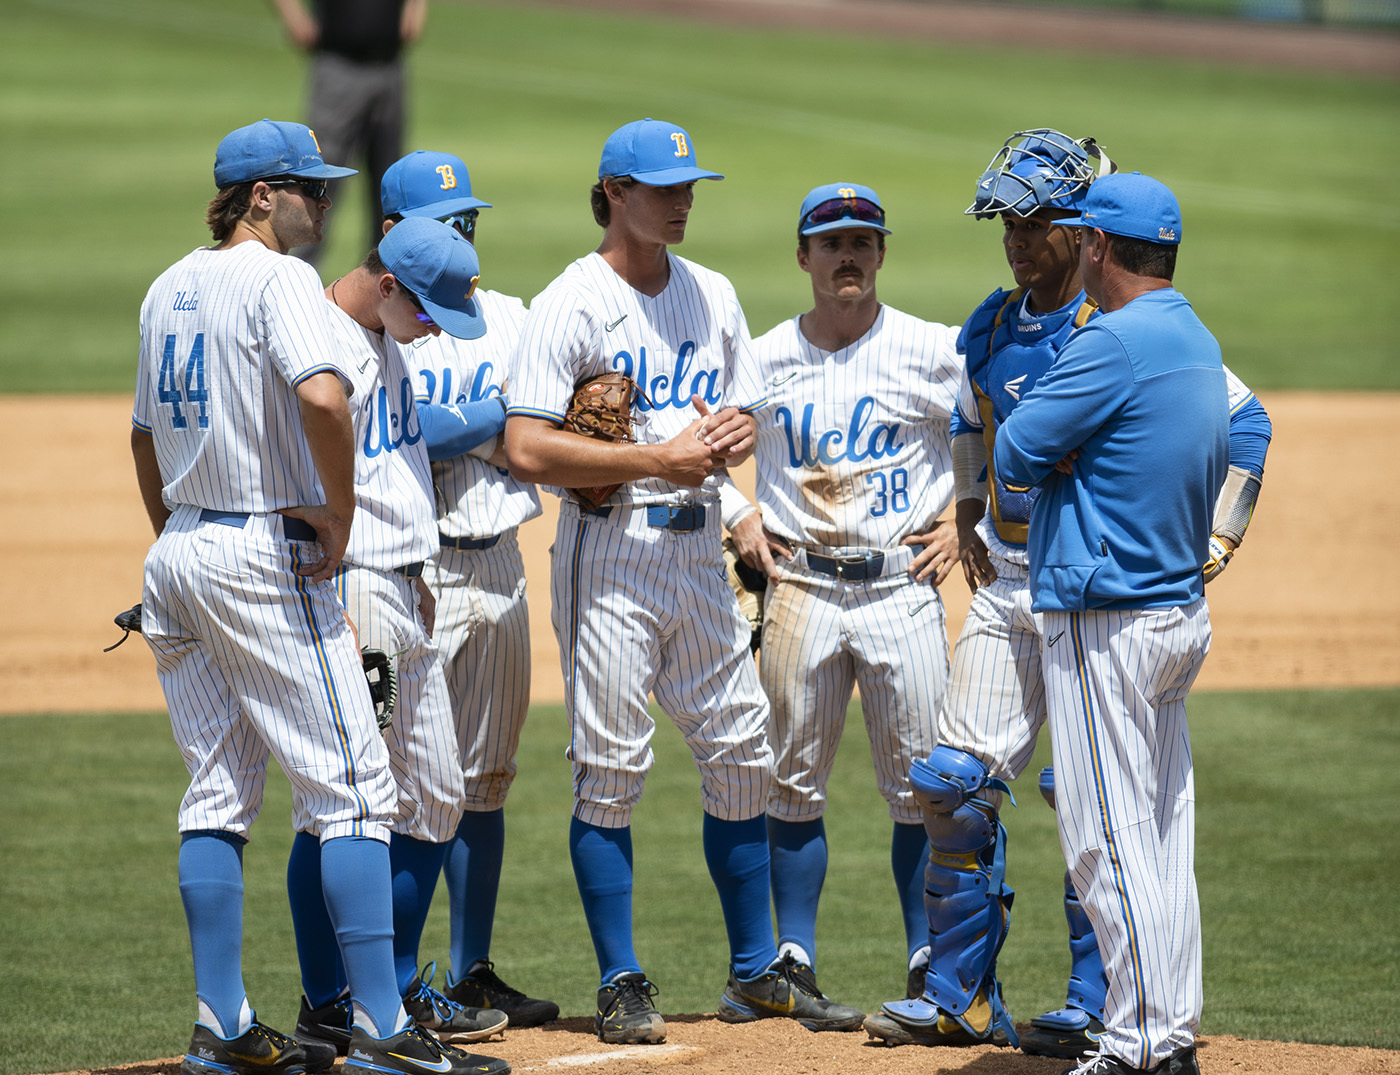 UCLA baseball ends Pac12 tournament run with walkoff loss to Oregon